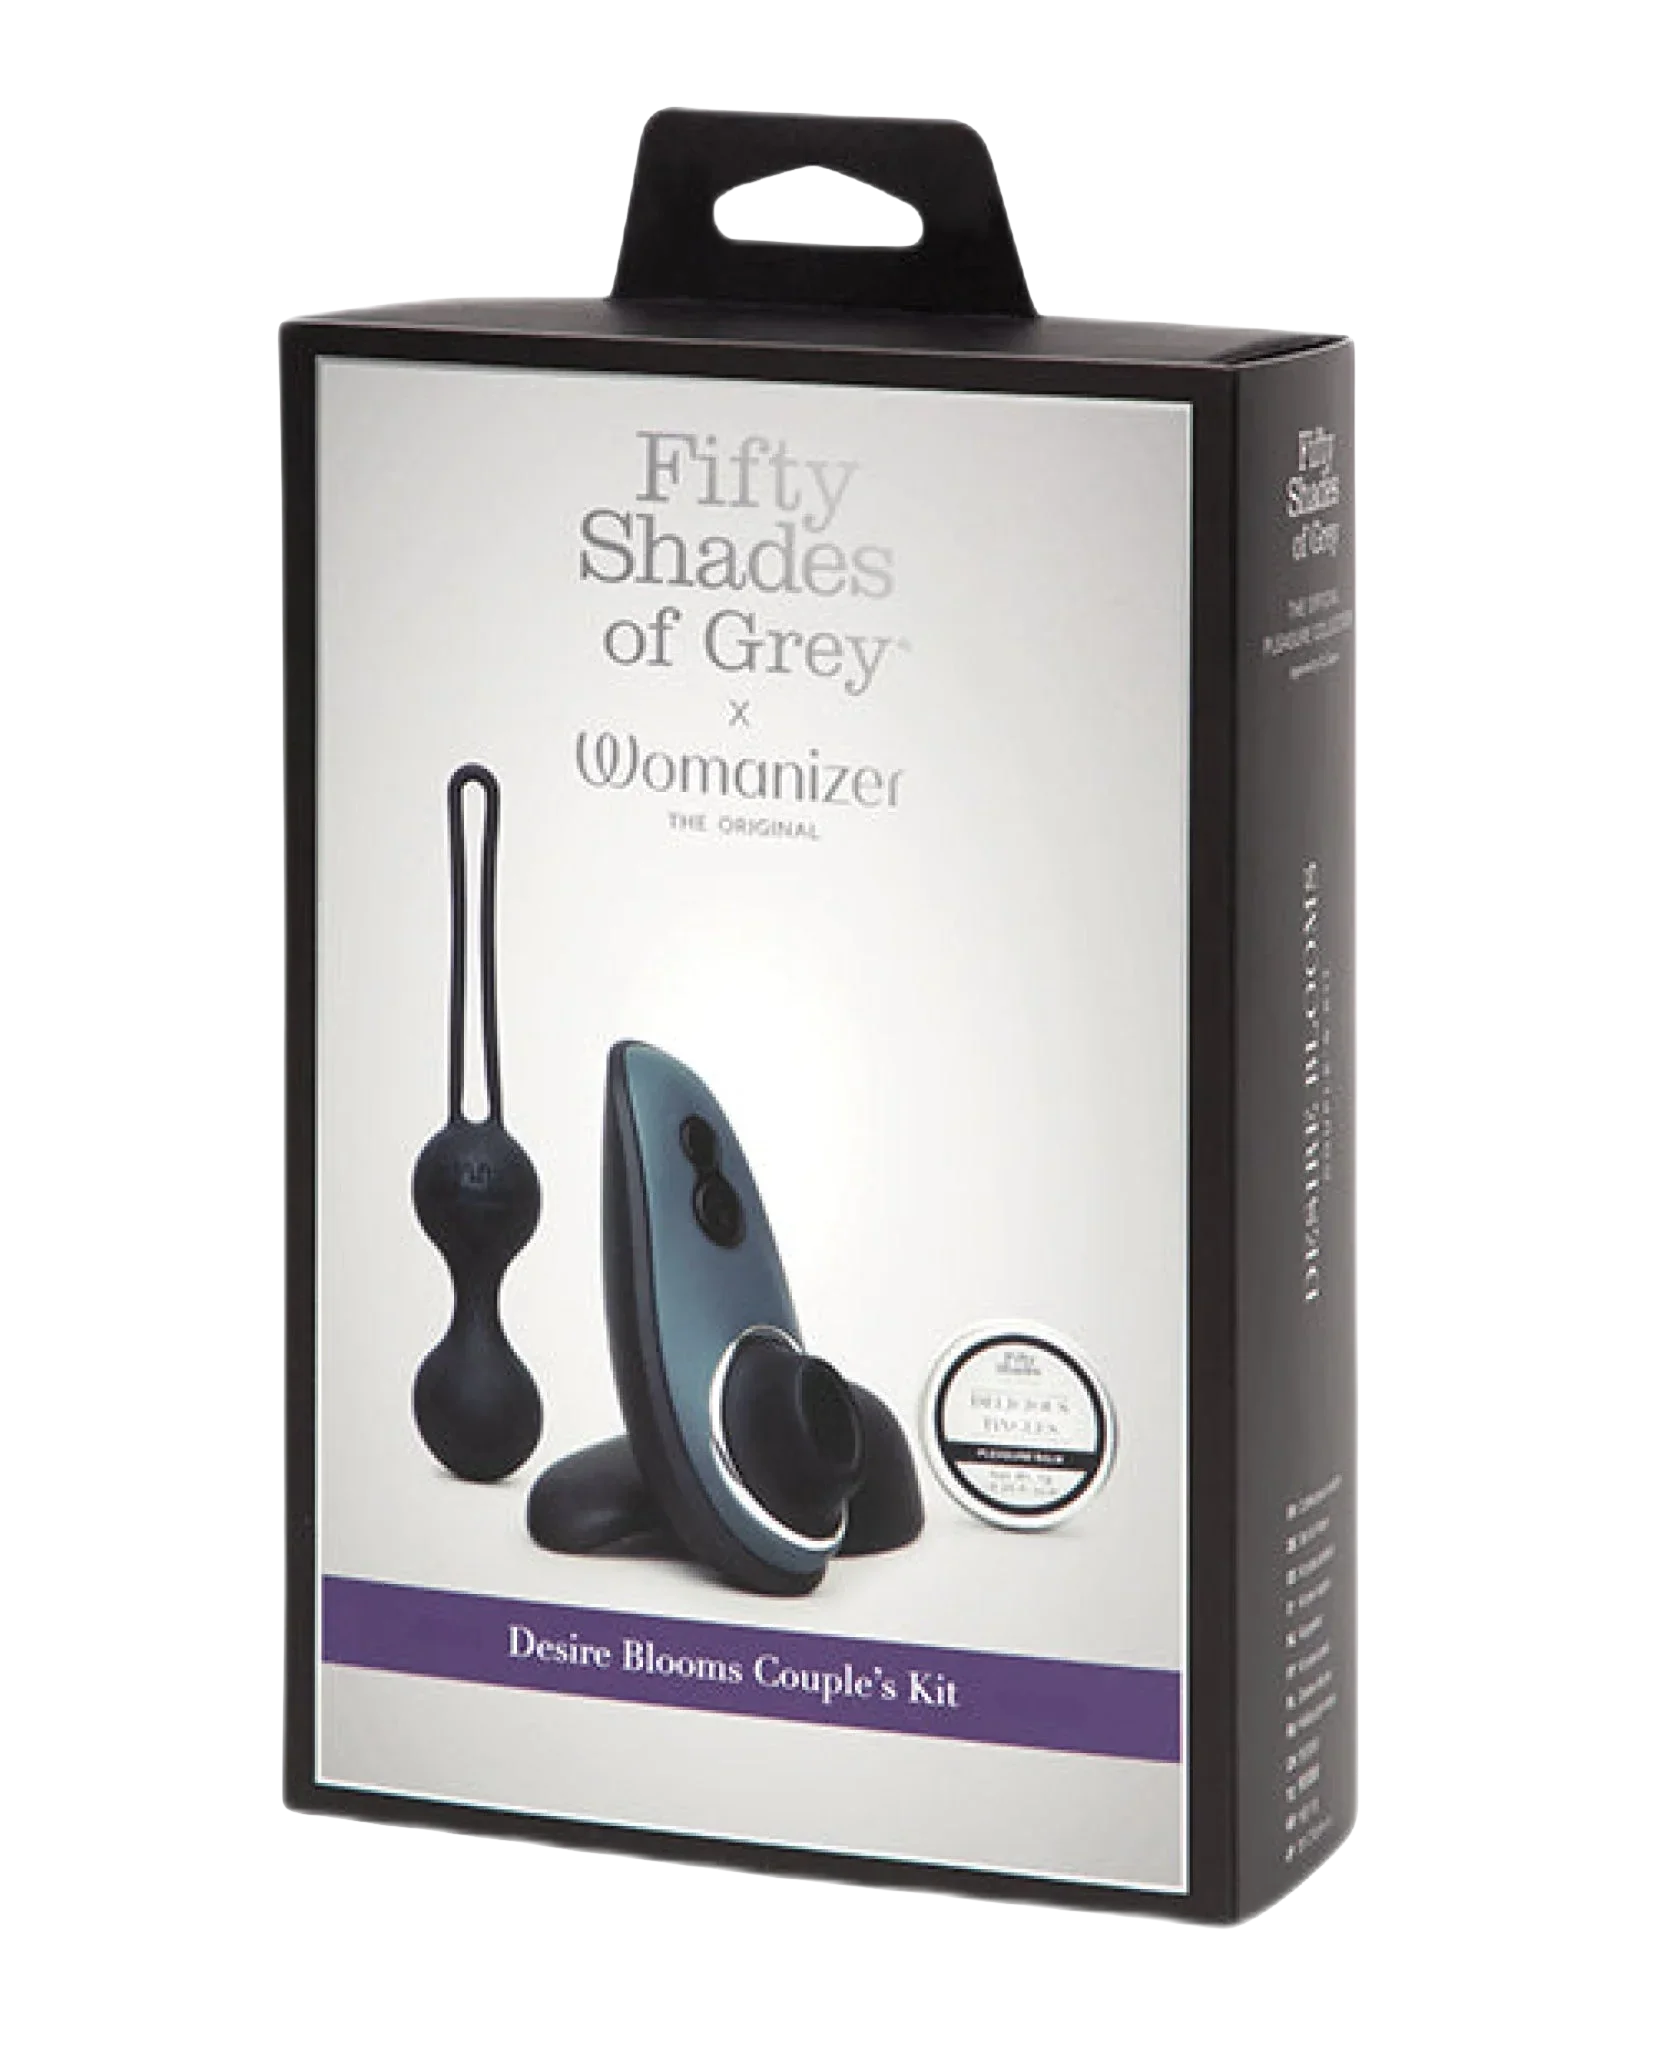 Fifty Shades Of Grey & Womanizer Desire Blooms Kit Lovehoney C/o Wow Tech